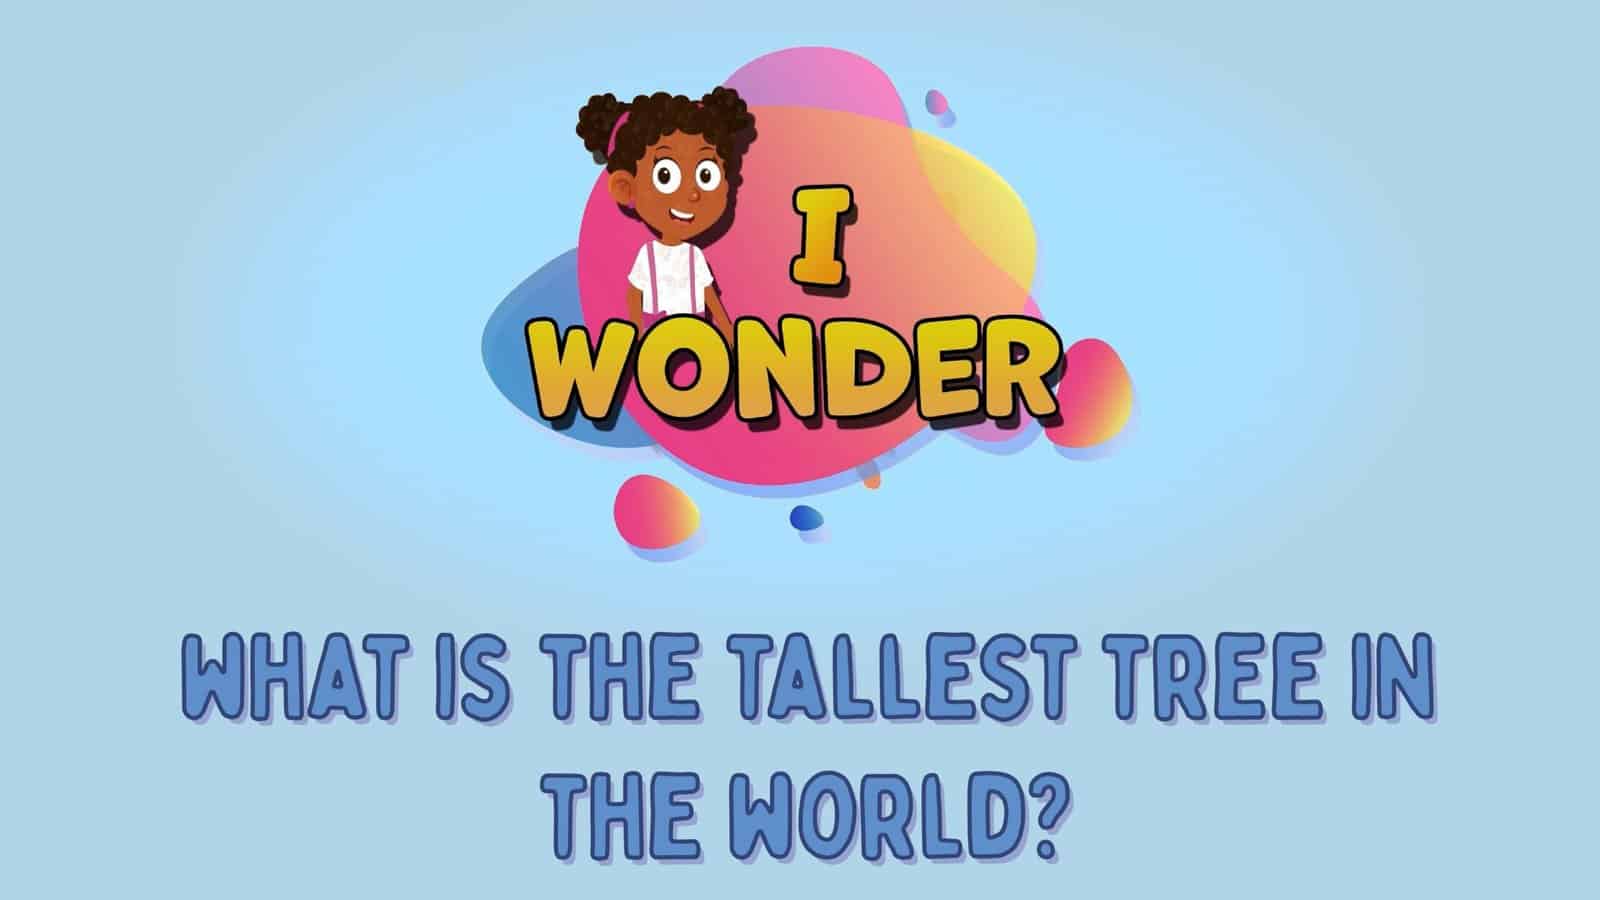 What Is The Tallest Tree In The World?